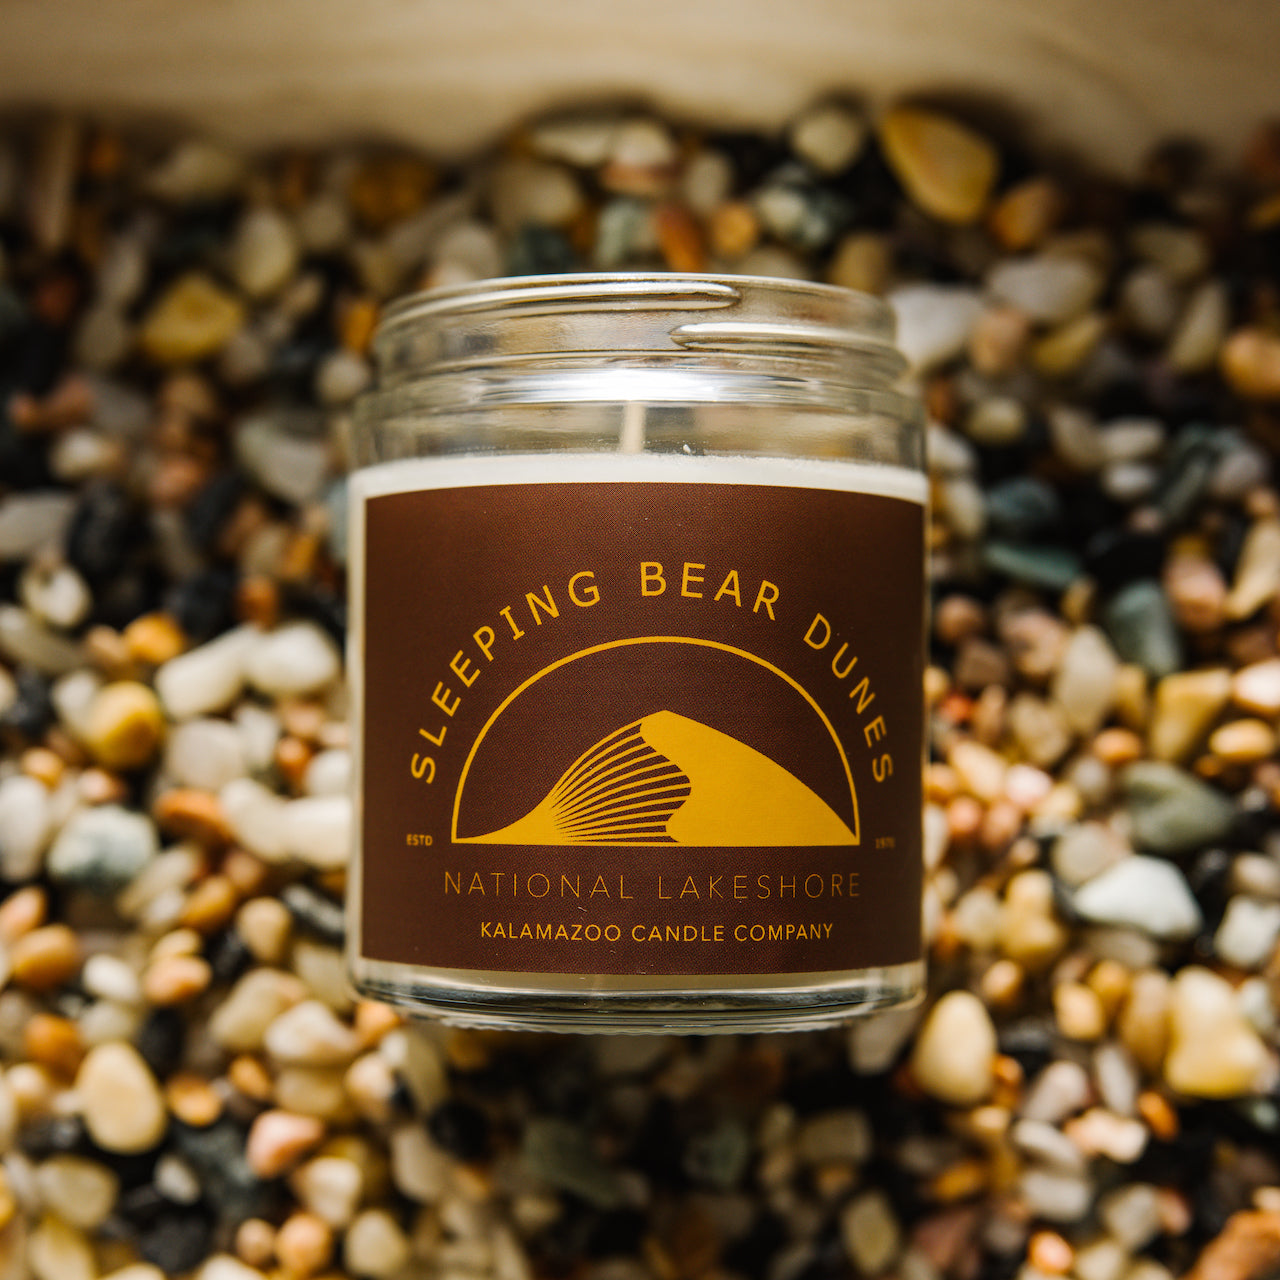 Sleeping Bear Dunes Candle on bed of stones